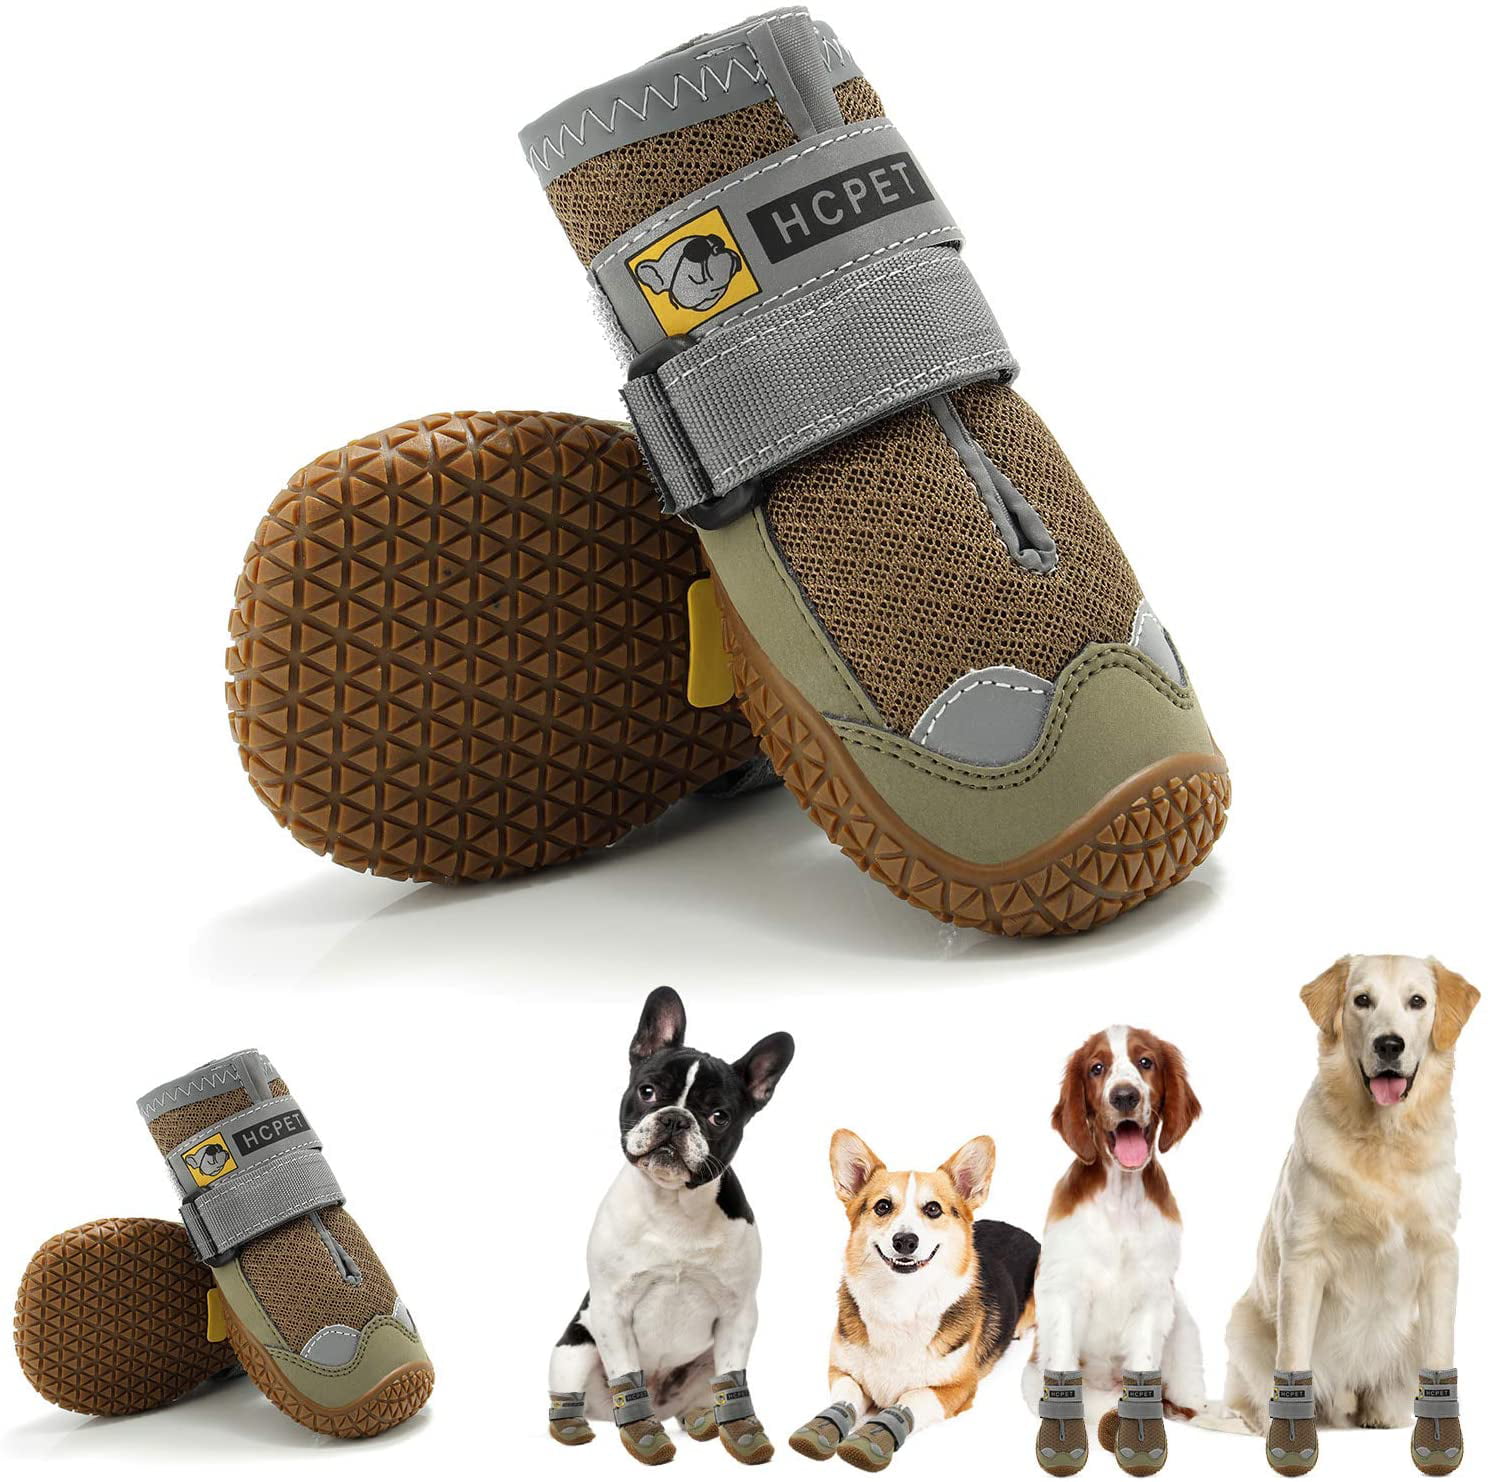 Anti-Slip Puppy Booties Paw Protector with Reflective Straps 4Pcs Hcpet Dog Boots Breathable Dog Shoes for Small Medium Large Dogs 